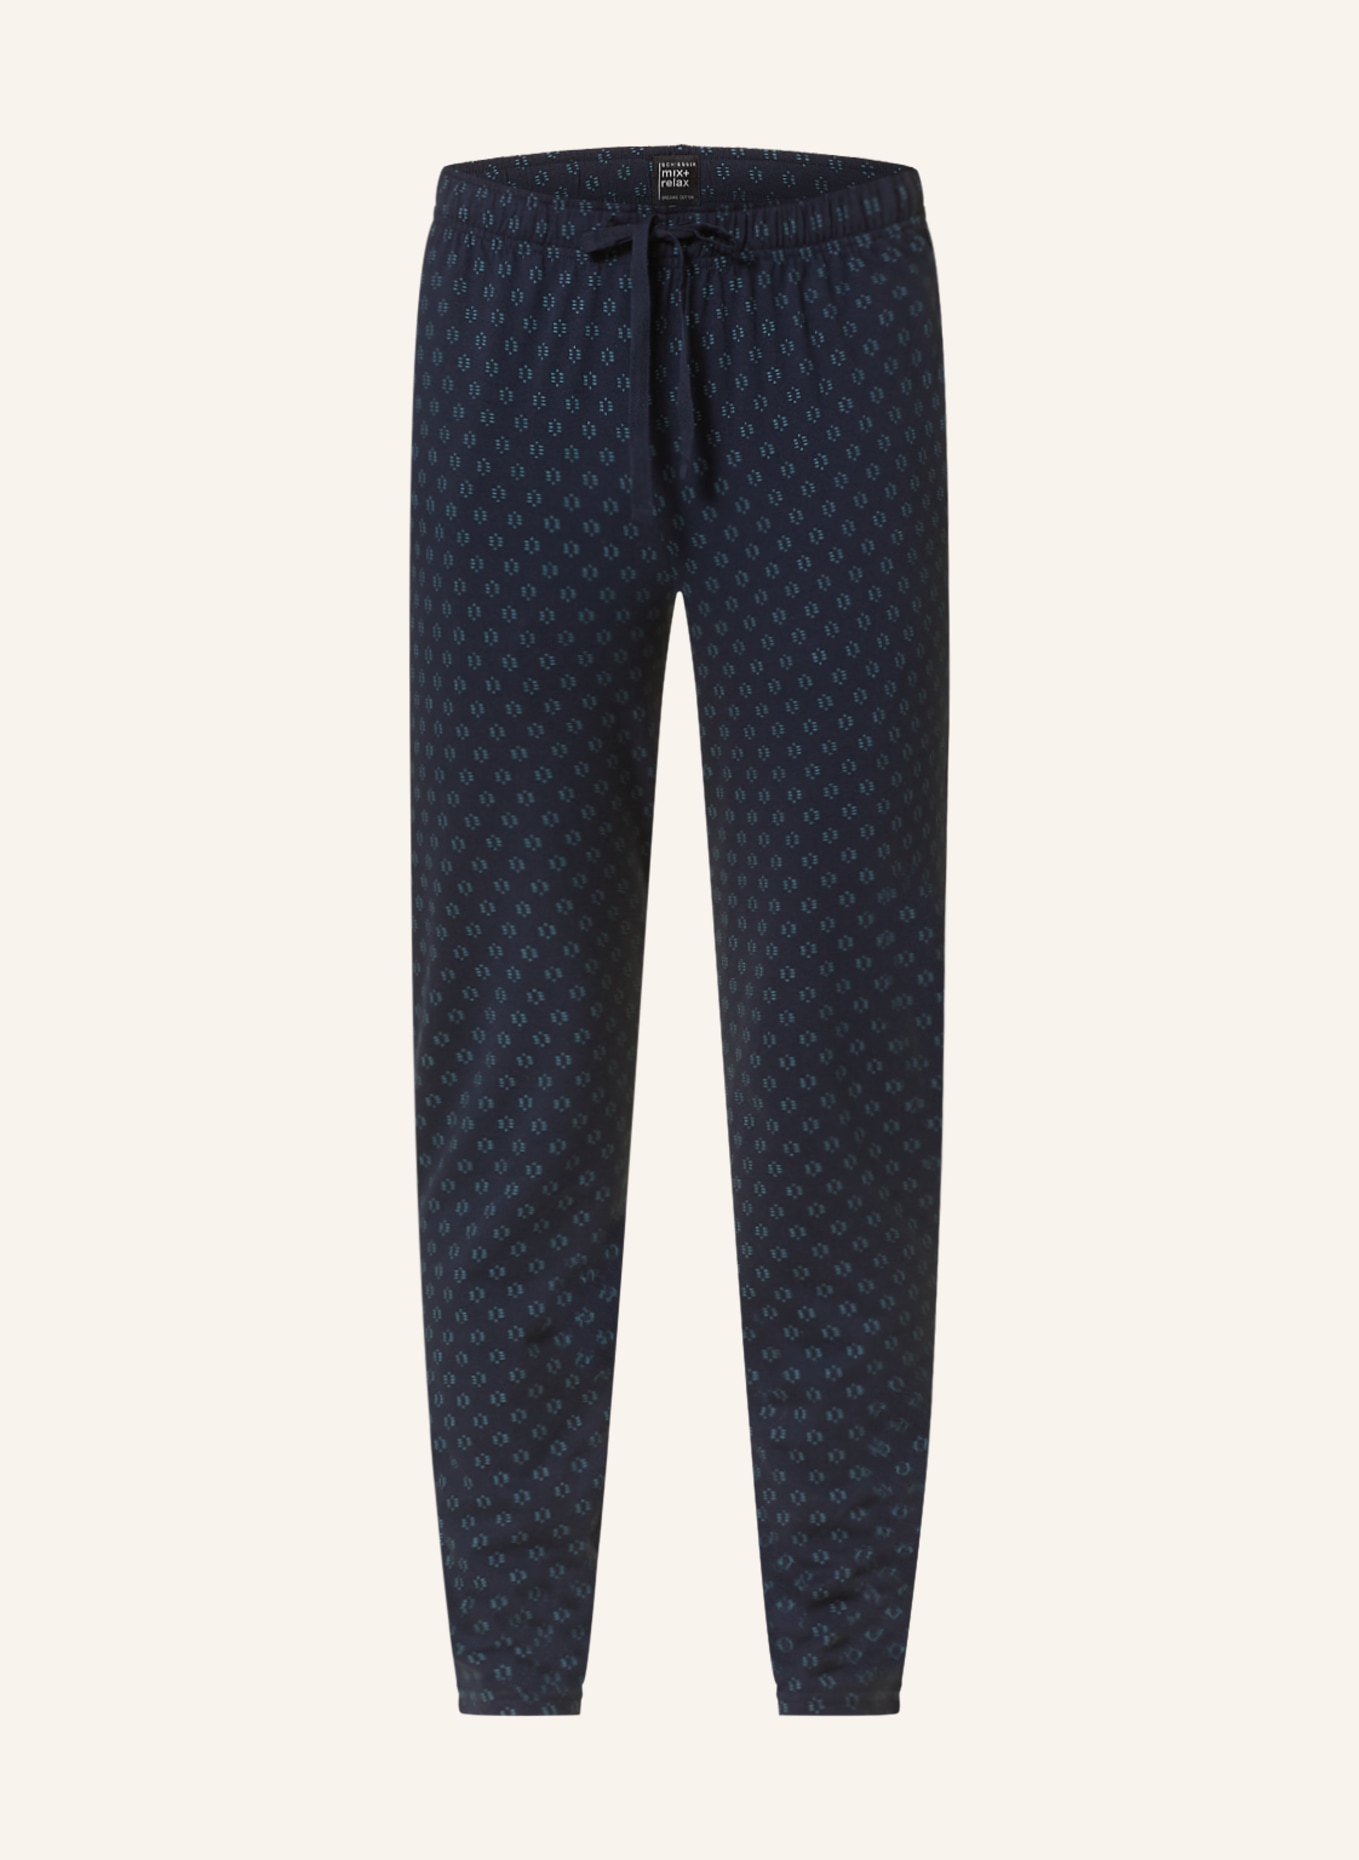 SCHIESSER Pajama pants MIX+RELAX, Color: DARK BLUE/ TEAL (Image 1)